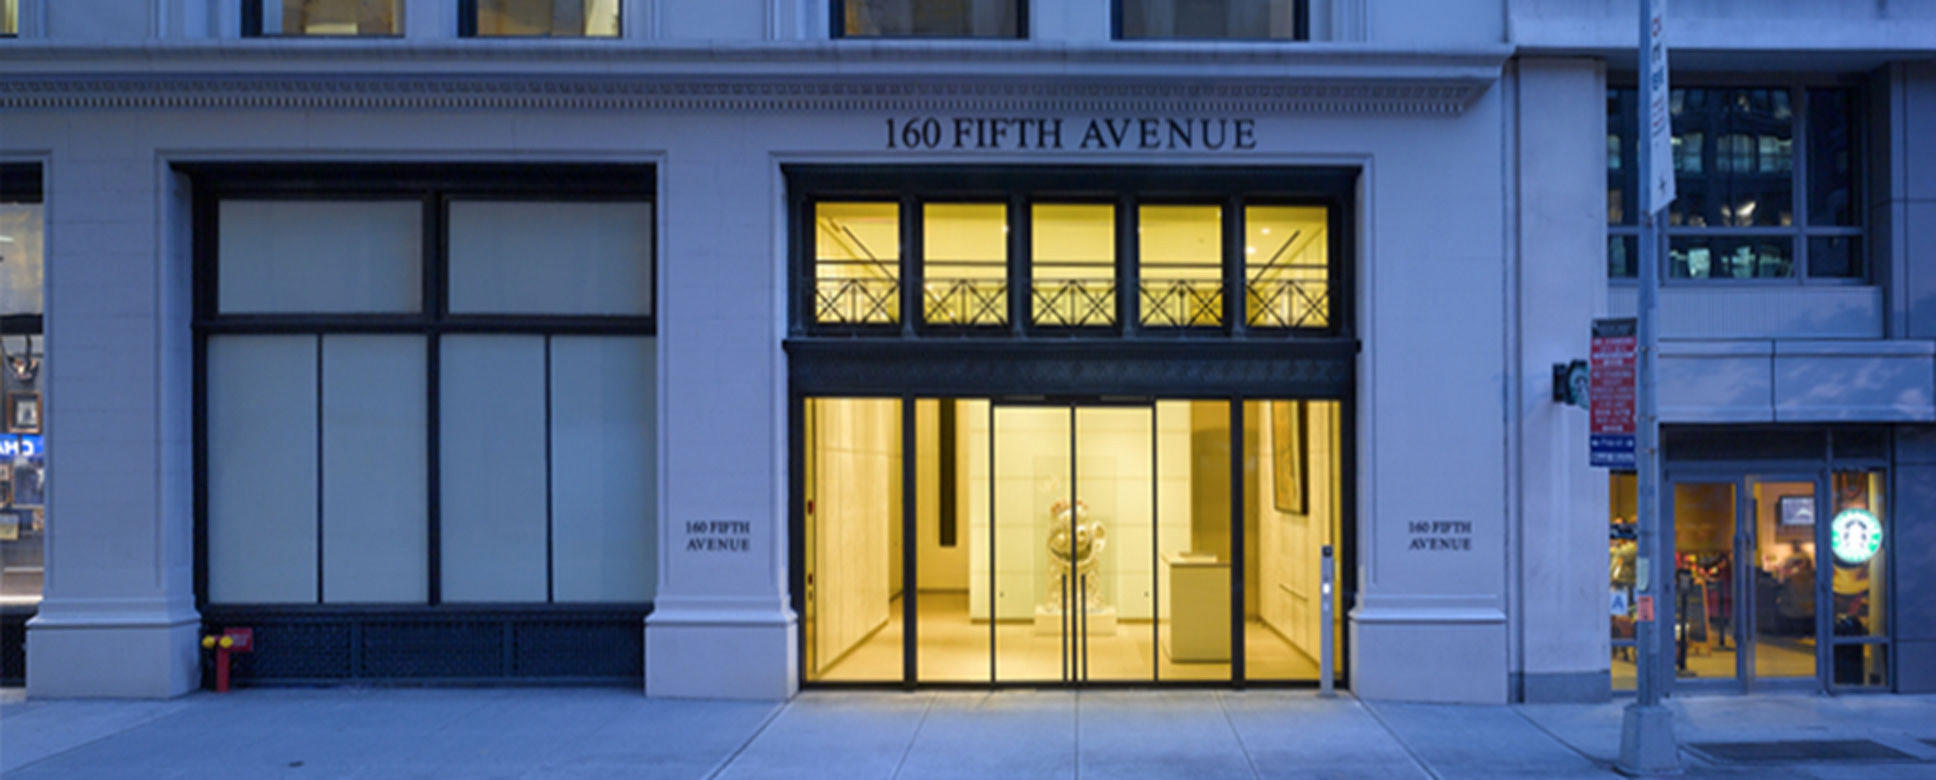 160 Fifth Avenue (credit: RFR Holdings)